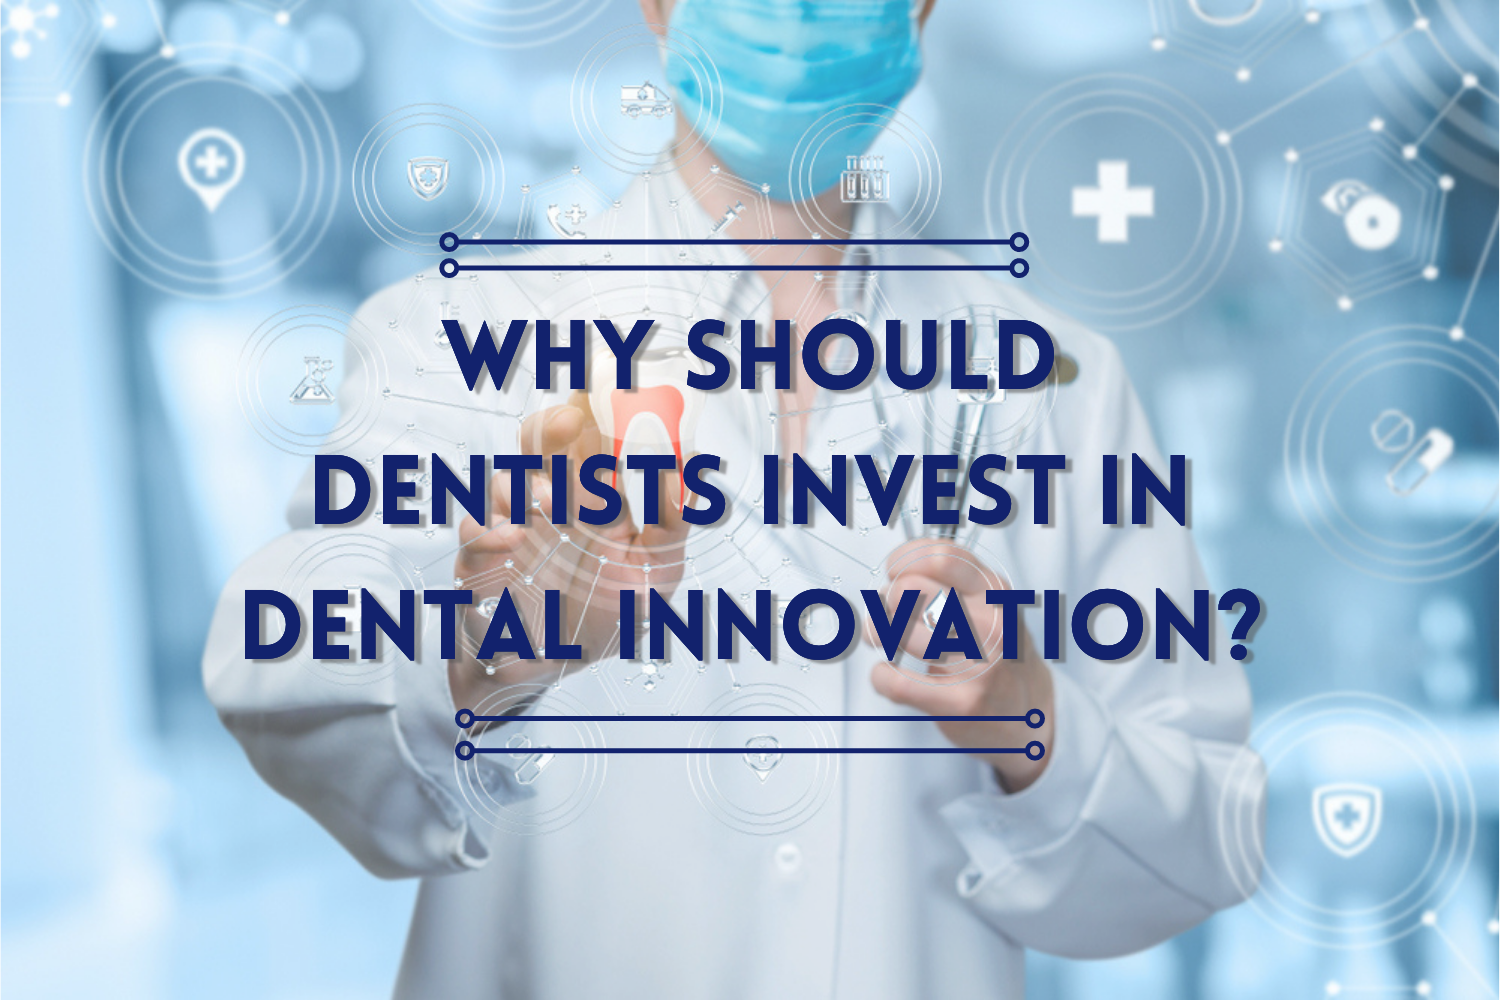 Why should dentists invest in dental innovation?